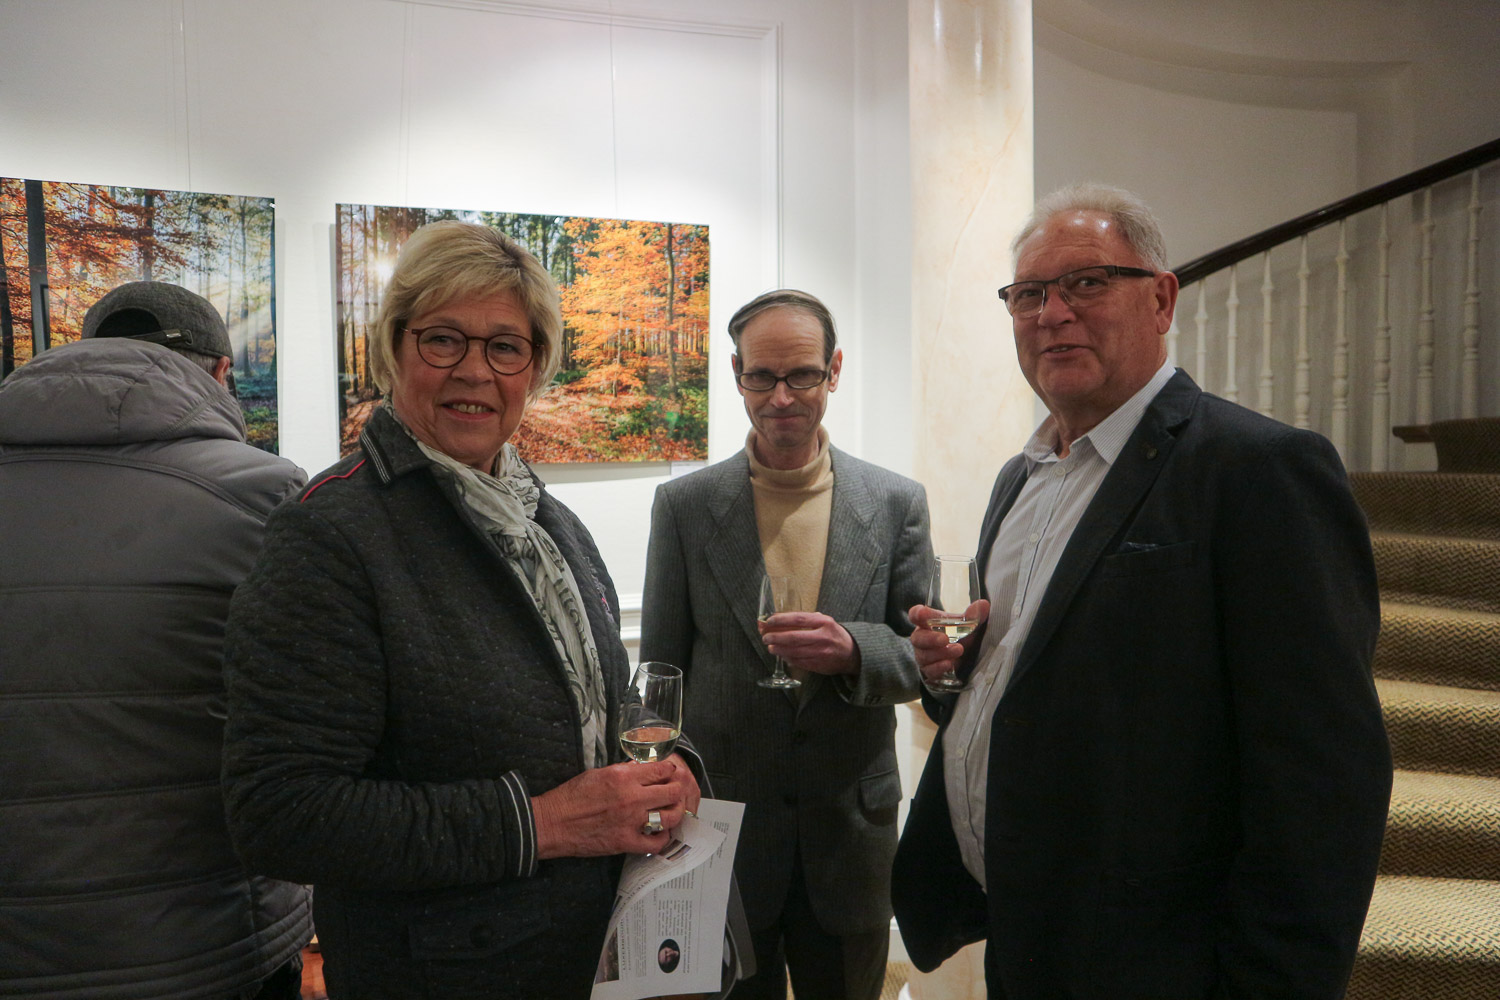 Seasons of Luxembourg by Christophe Van Biesen - Exhibition at the Cercle Munster